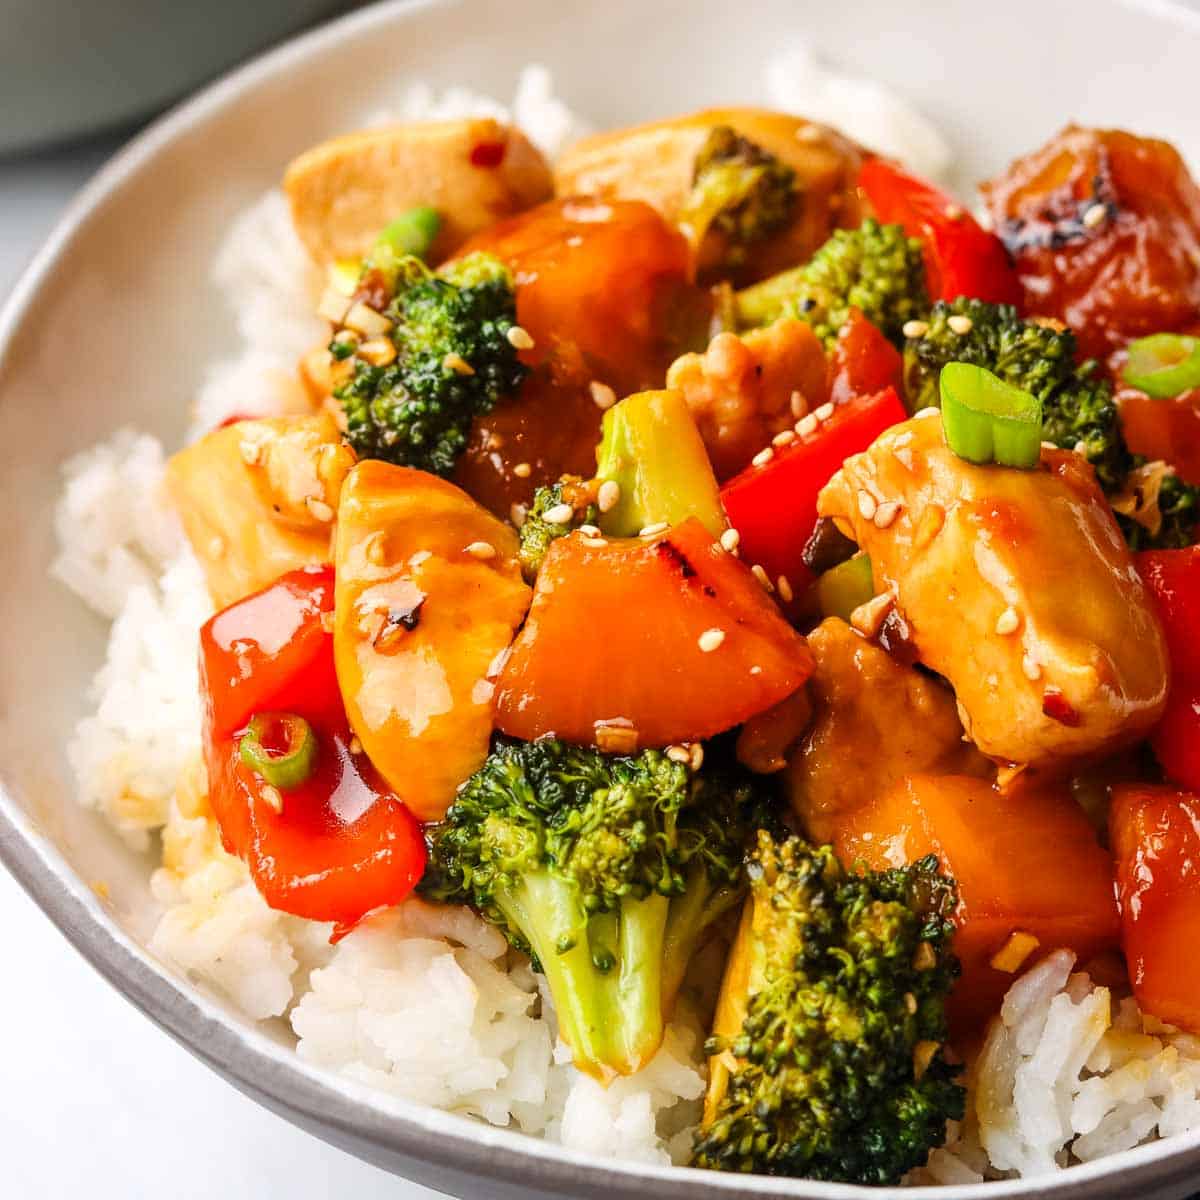 Closeup of a chicken and vegetable teriyaki stir fry on a bed of white rice in a bowl.